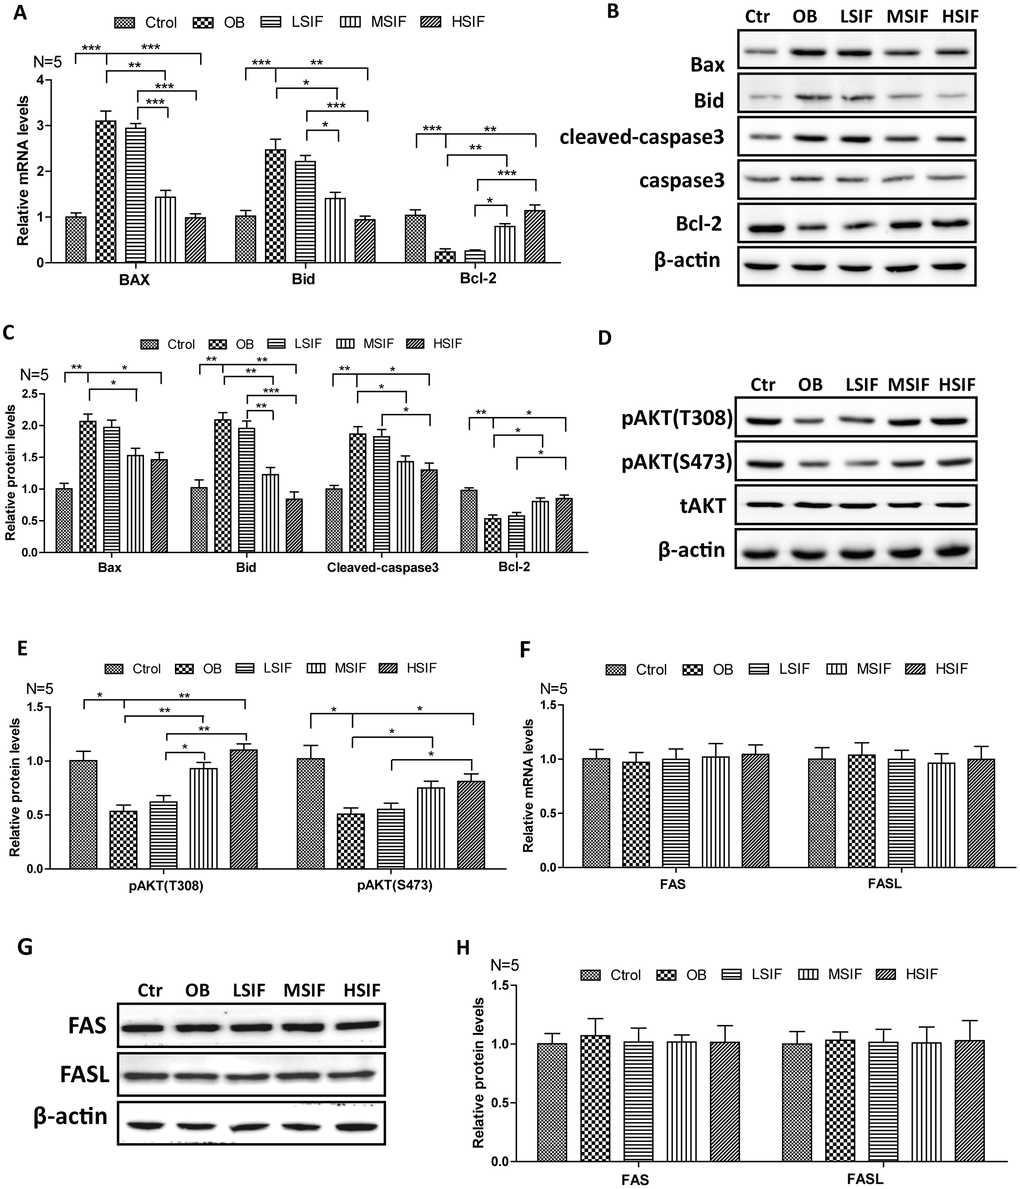 Soy isoflavones could reduce apoptosis in hypothalamus of DIO male mice. (A) Quantification shows the mRNA levels of apoptosis factors in hypothalamus of DIO mice fed with basal diets and the addition with different doses of soy isoflavones; (B, C) Western blots and quantification show the apoptosis factors protein levels in hypothalamus of DIO mice fed with basal diets and the addition with different doses of soy isoflavones; (D, E) Western blots and quantification show the phosphorylation levels of AKT in hypothalamus of DIO mice fed with basal diets and the addition with different doses of soy isoflavones; (F) Quantification shows the mRNA levels of FAS and FASL in hypothalamus of DIO mice fed with basal diets and the addition with different doses of soy isoflavones; (G, H) Western blots and quantification show the protein levels of FAS and FASL in hypothalamus of DIO mice fed with basal diets and the addition with different doses of soy isoflavones; * p 